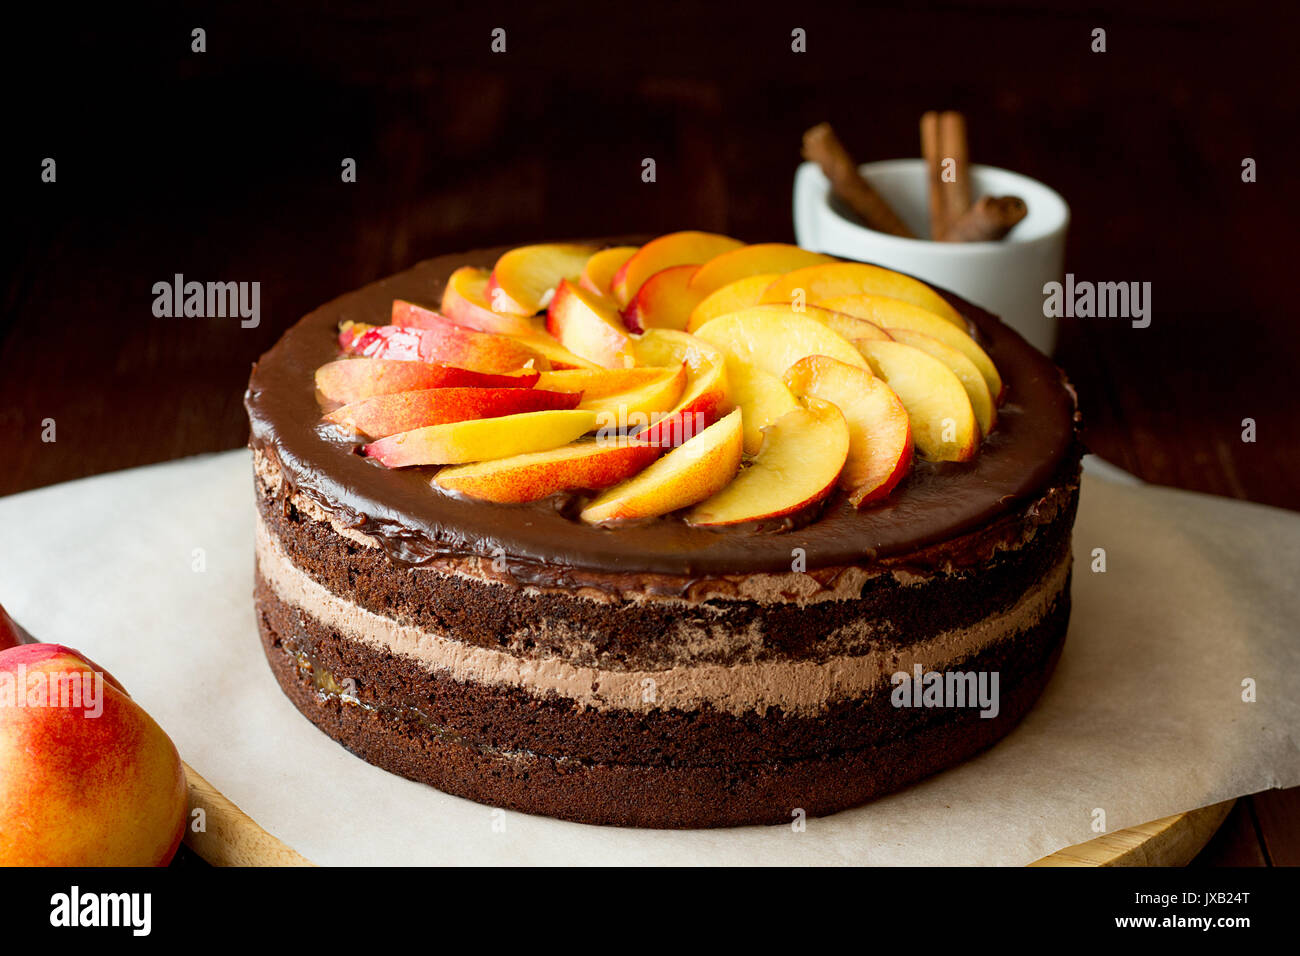 Chocolate cake with nectarines on cooking sheet selective focus Stock Photo